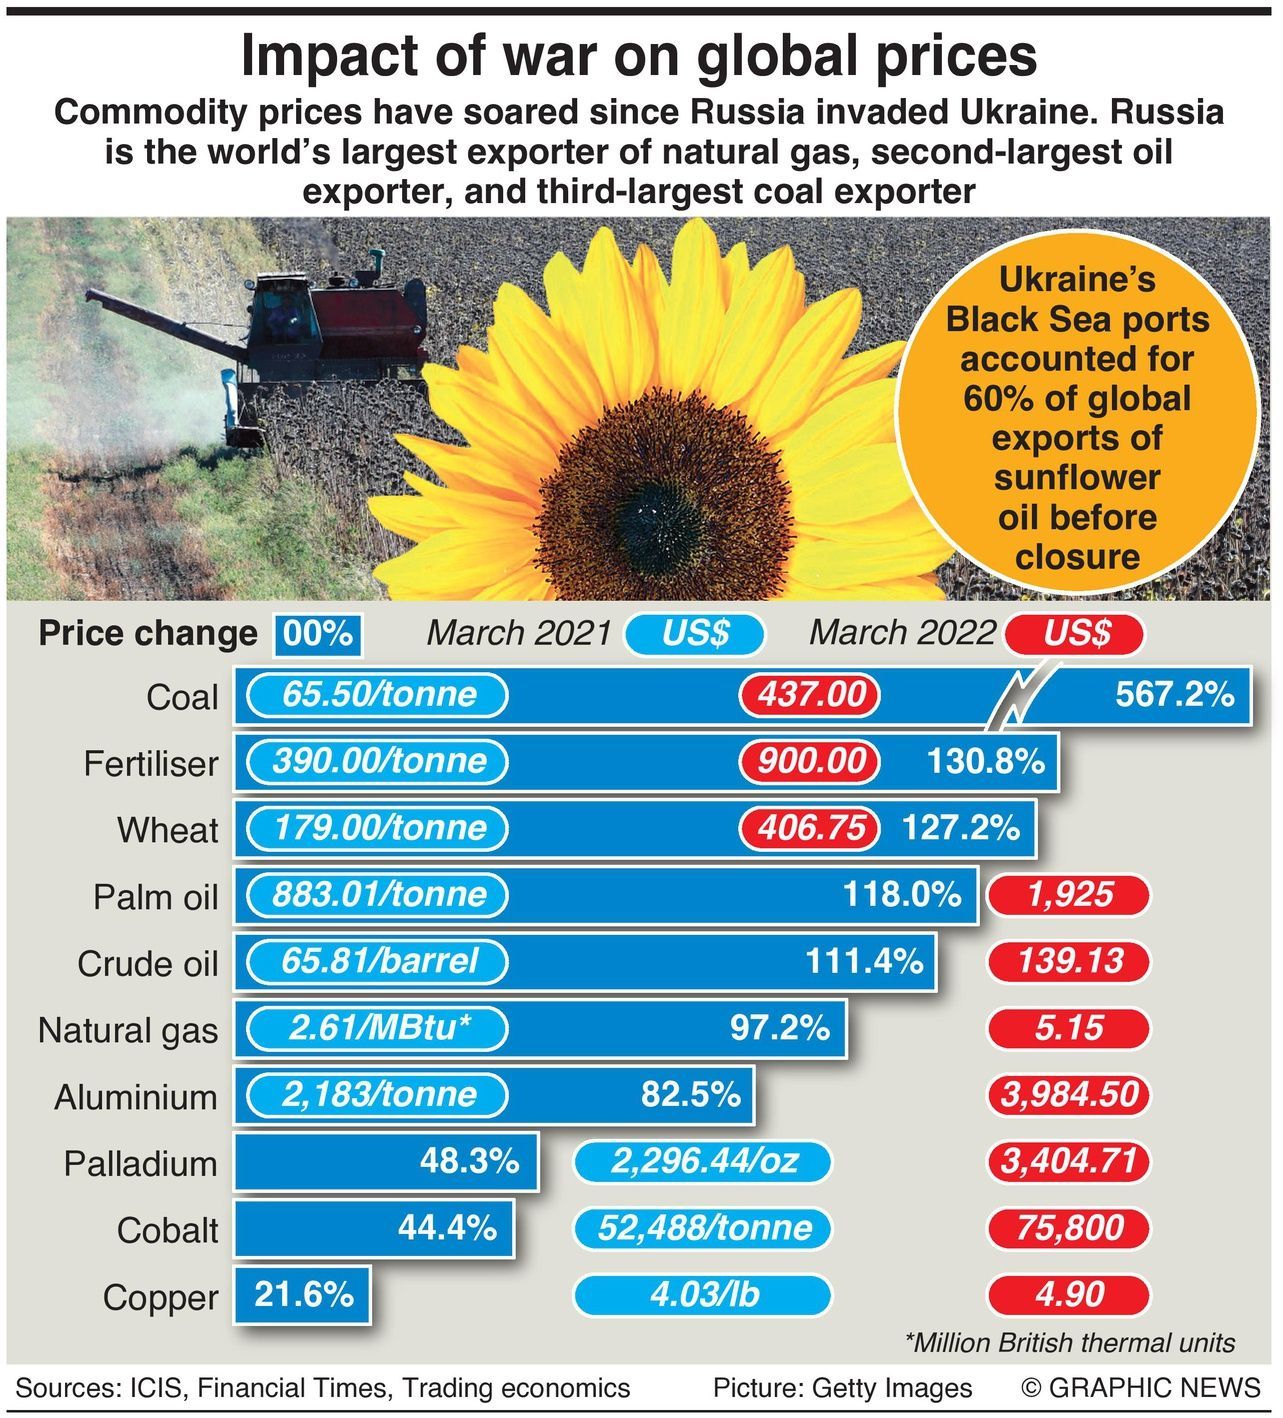 Impact of russias war against Ukraine in regard to commodity prices - infographic